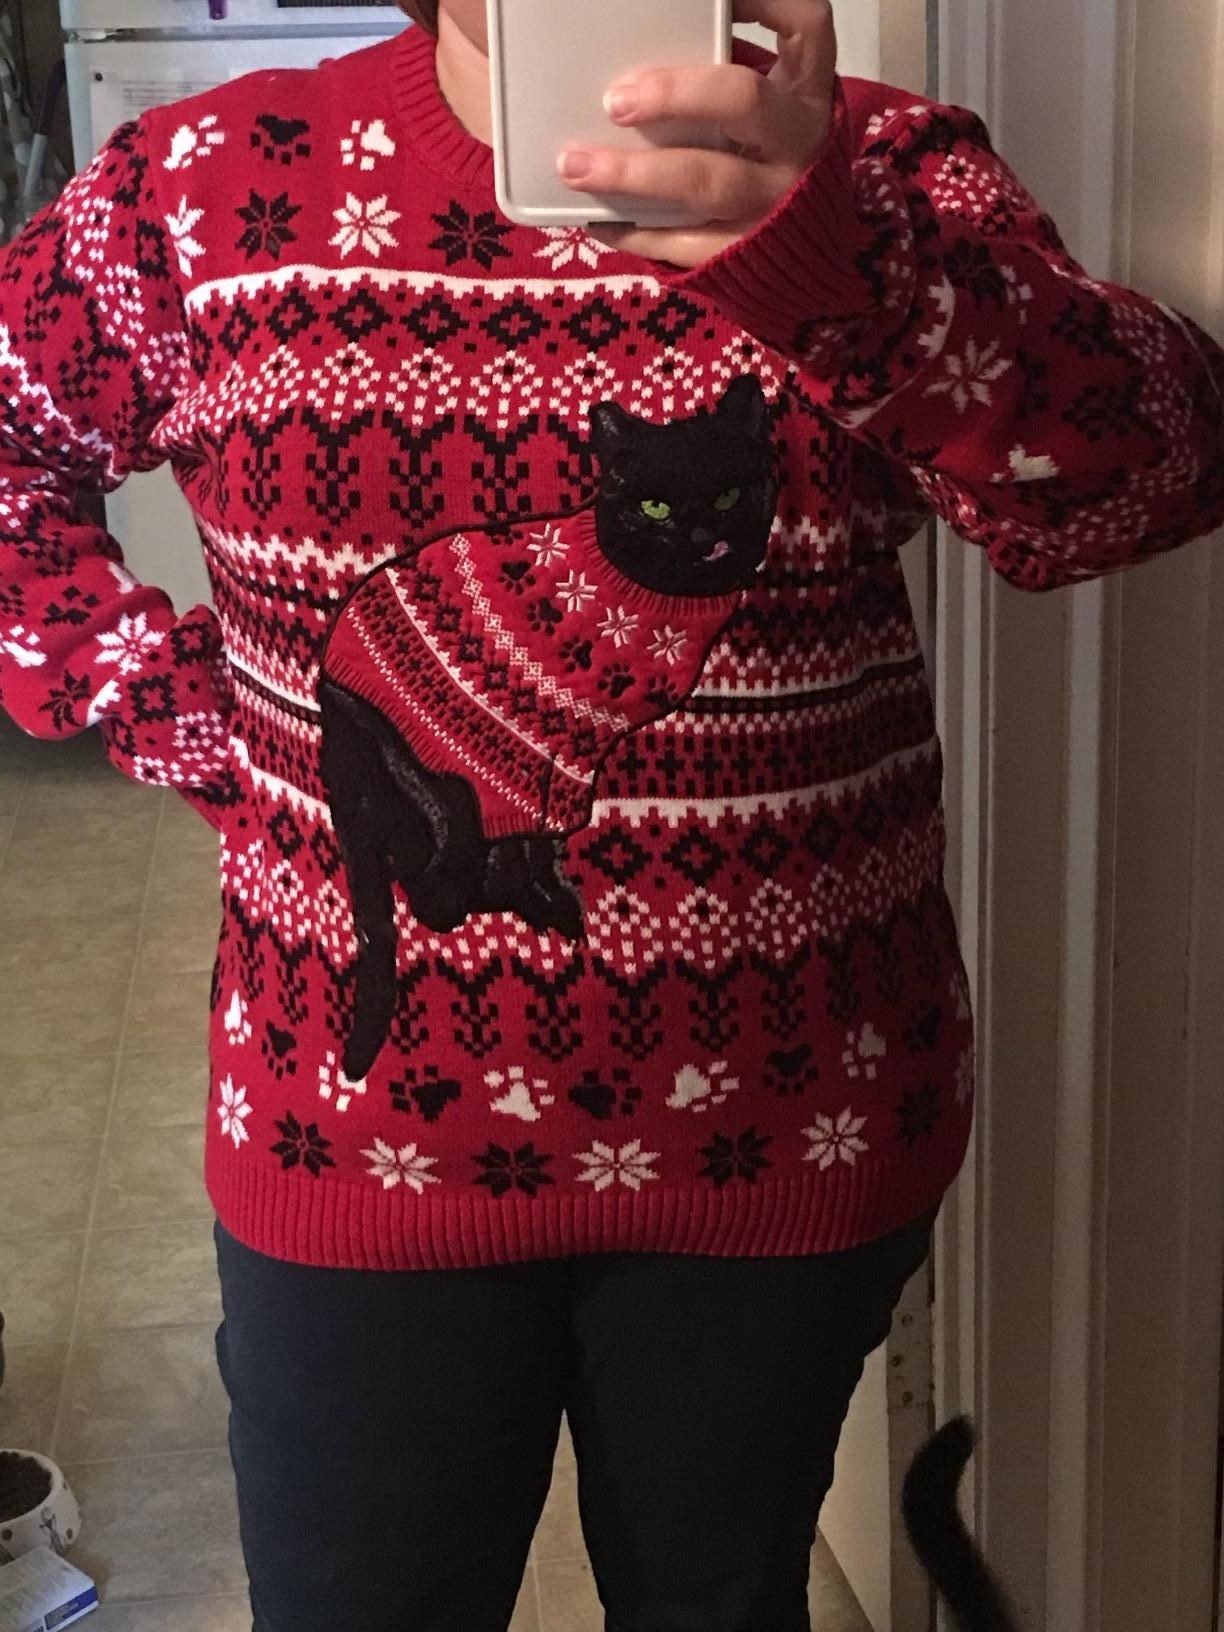 The sweater, which features a flocked cat image on top of a traditional snowflake pattern